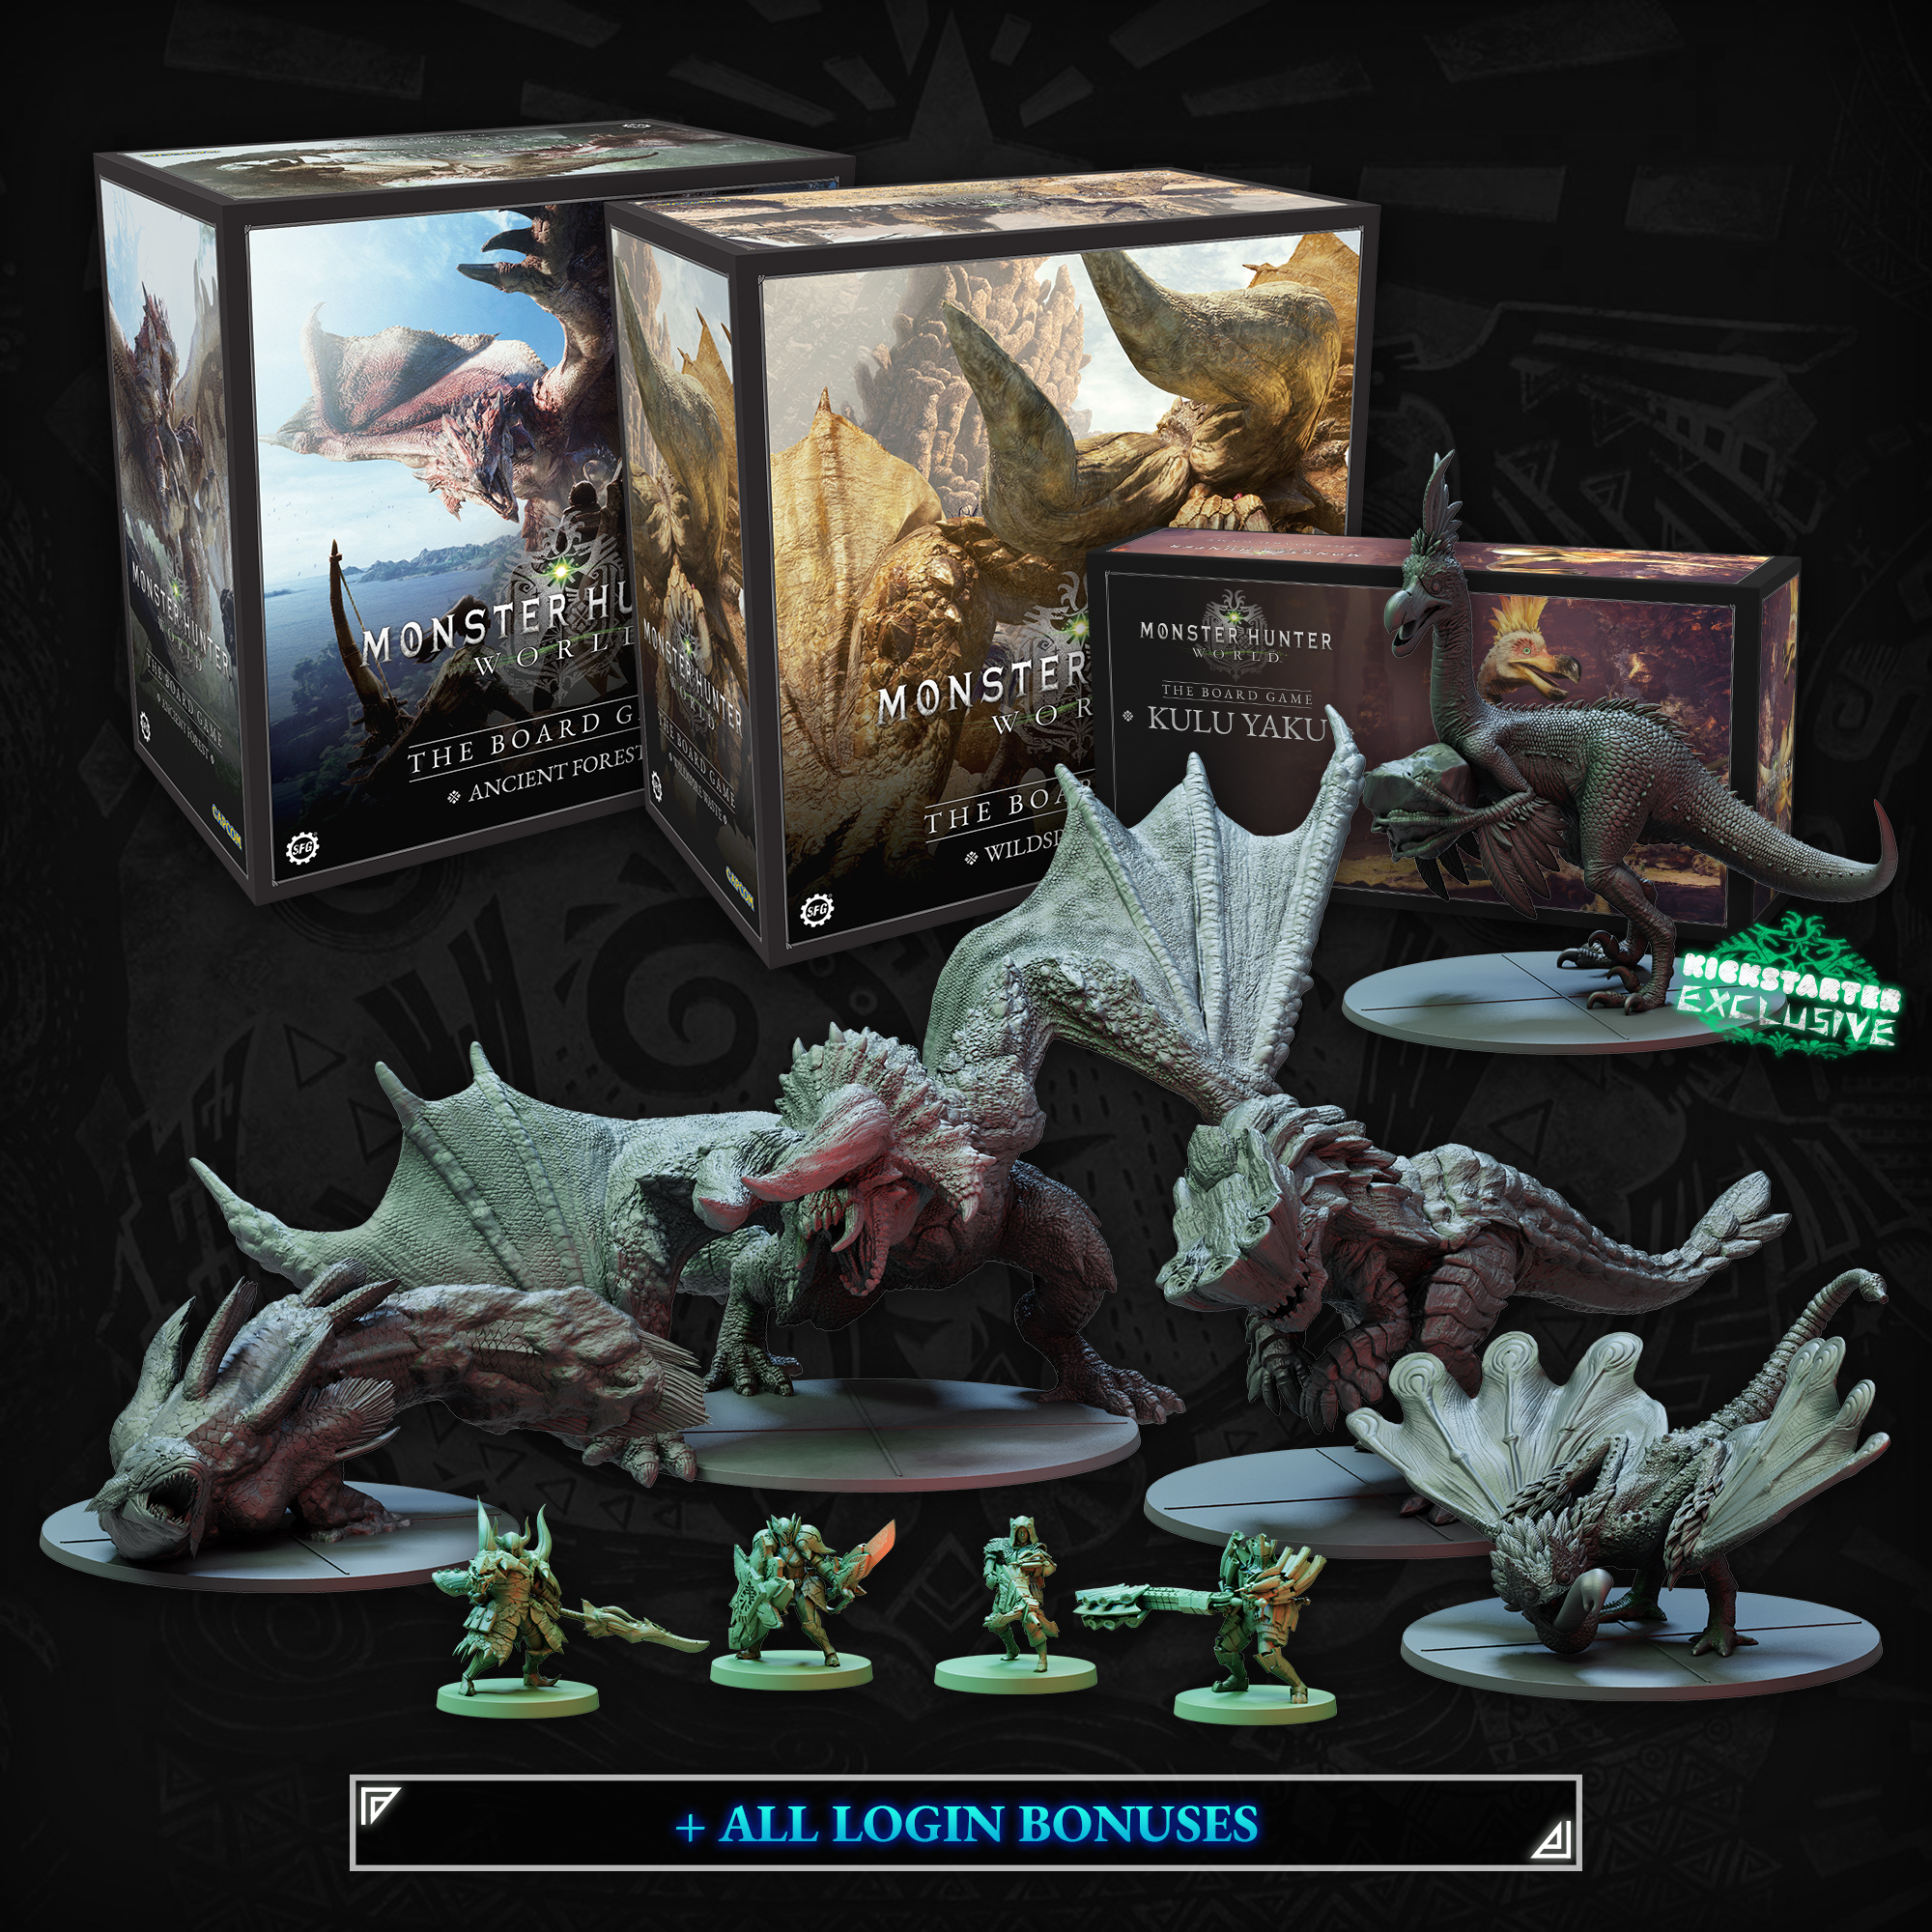 Monster Hunter World: The Board Game by Steamforged Games - Azure Rathalos  & Black Diablos Miniatures Set